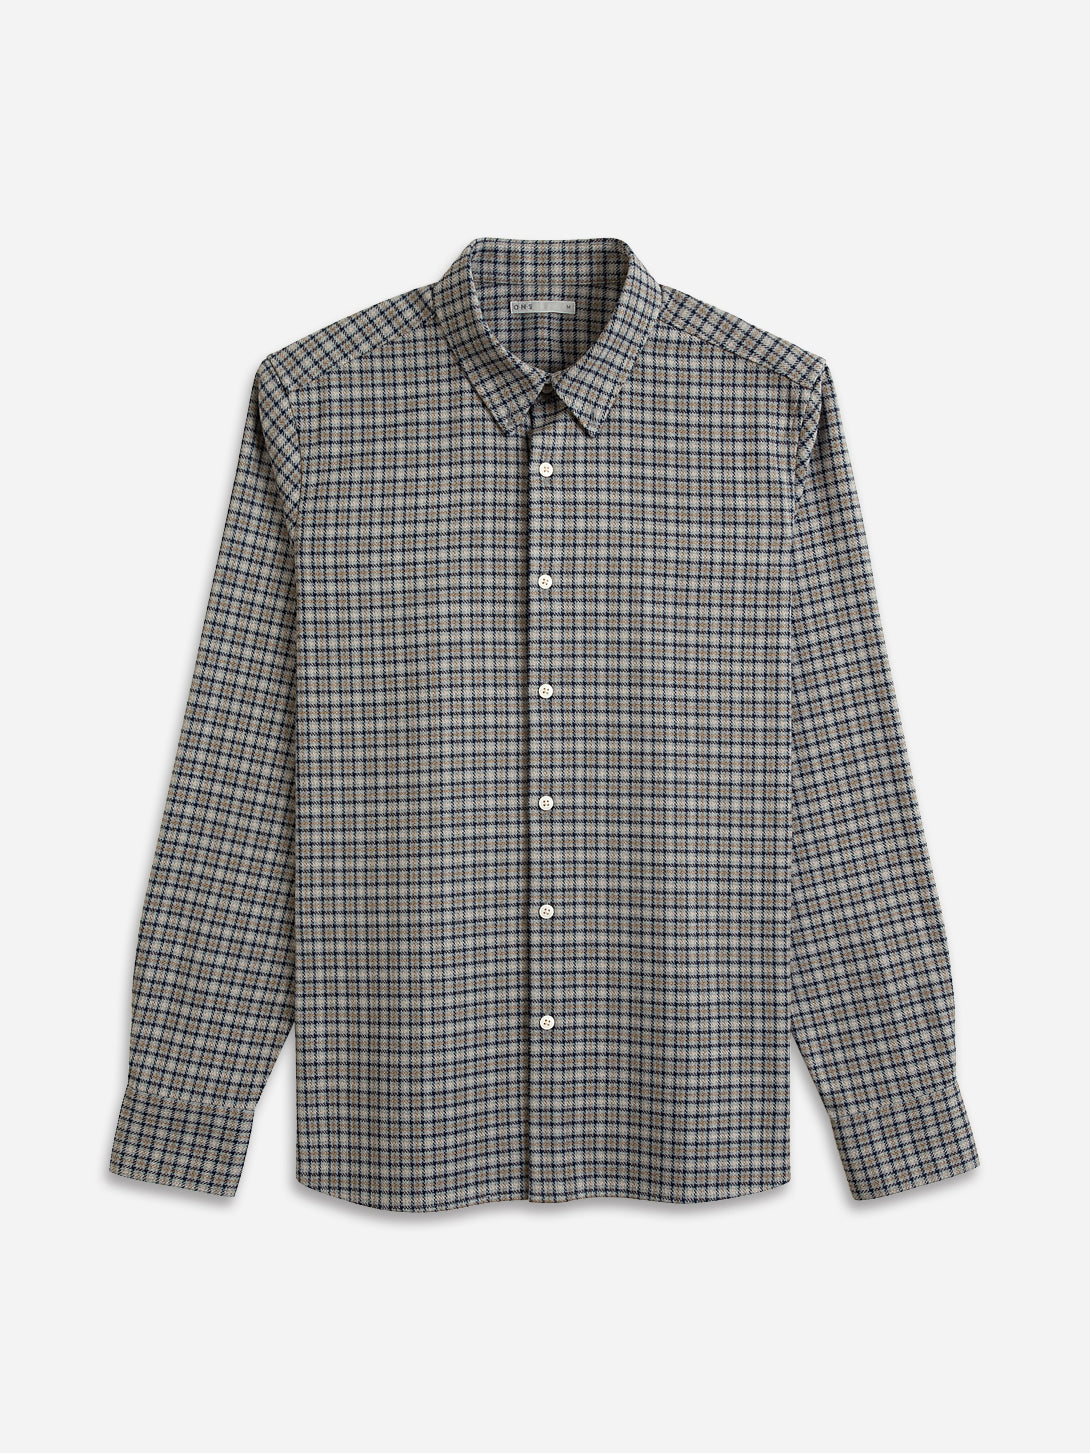 Navy/Khaki Check Fulton Houndstooth Fall Patterned Checkered Mens Button Up Shirt